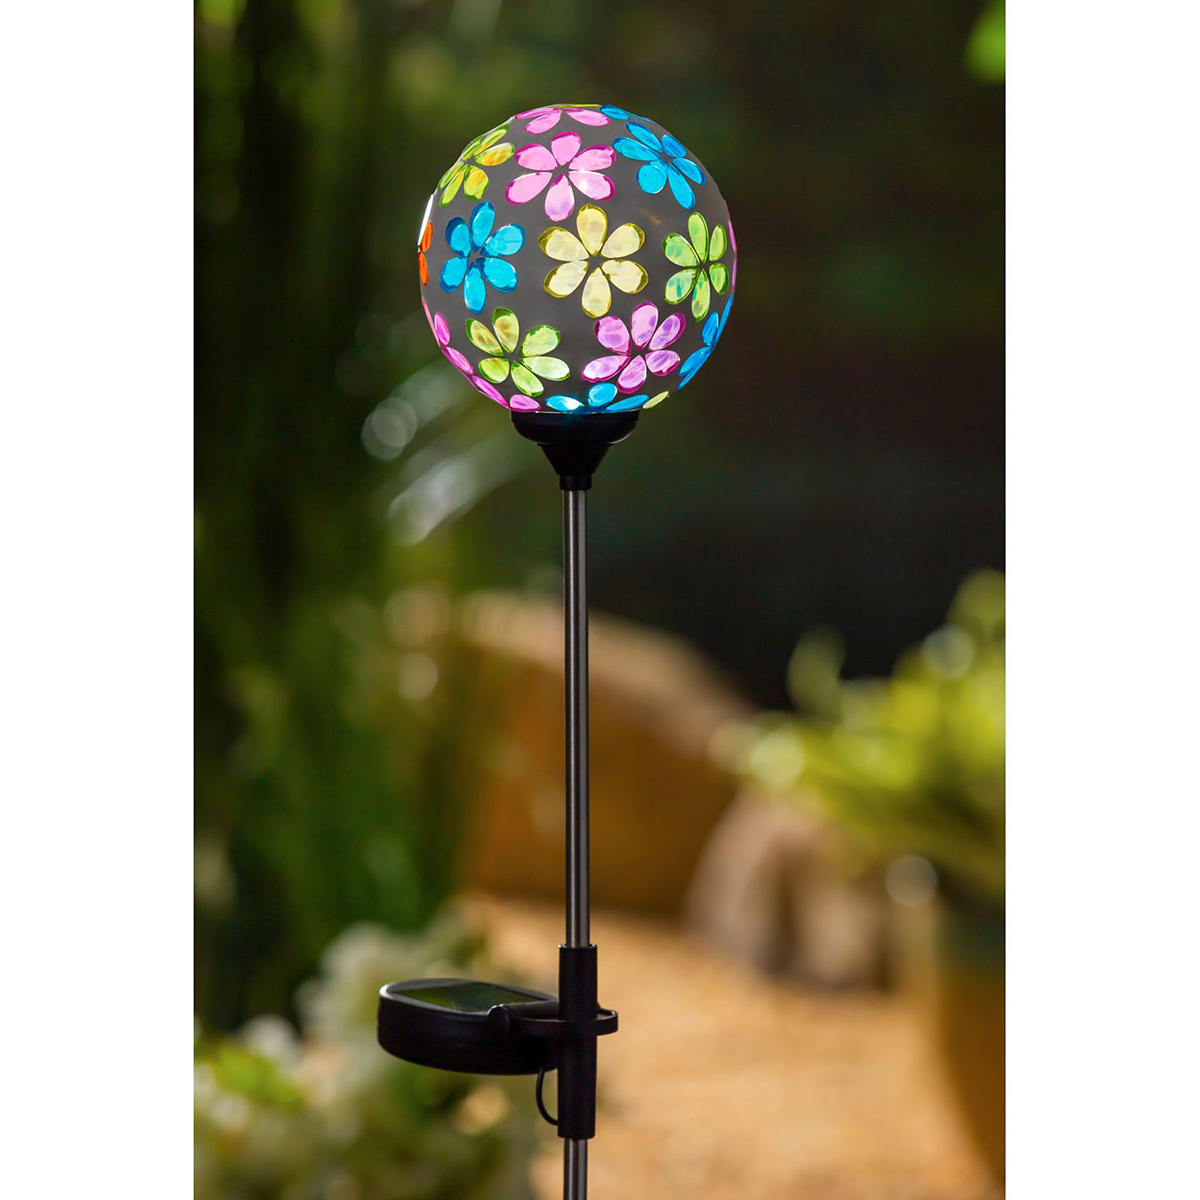 Evergreen 22in. Mosaic Flowers Globes Solar Garden Stakes